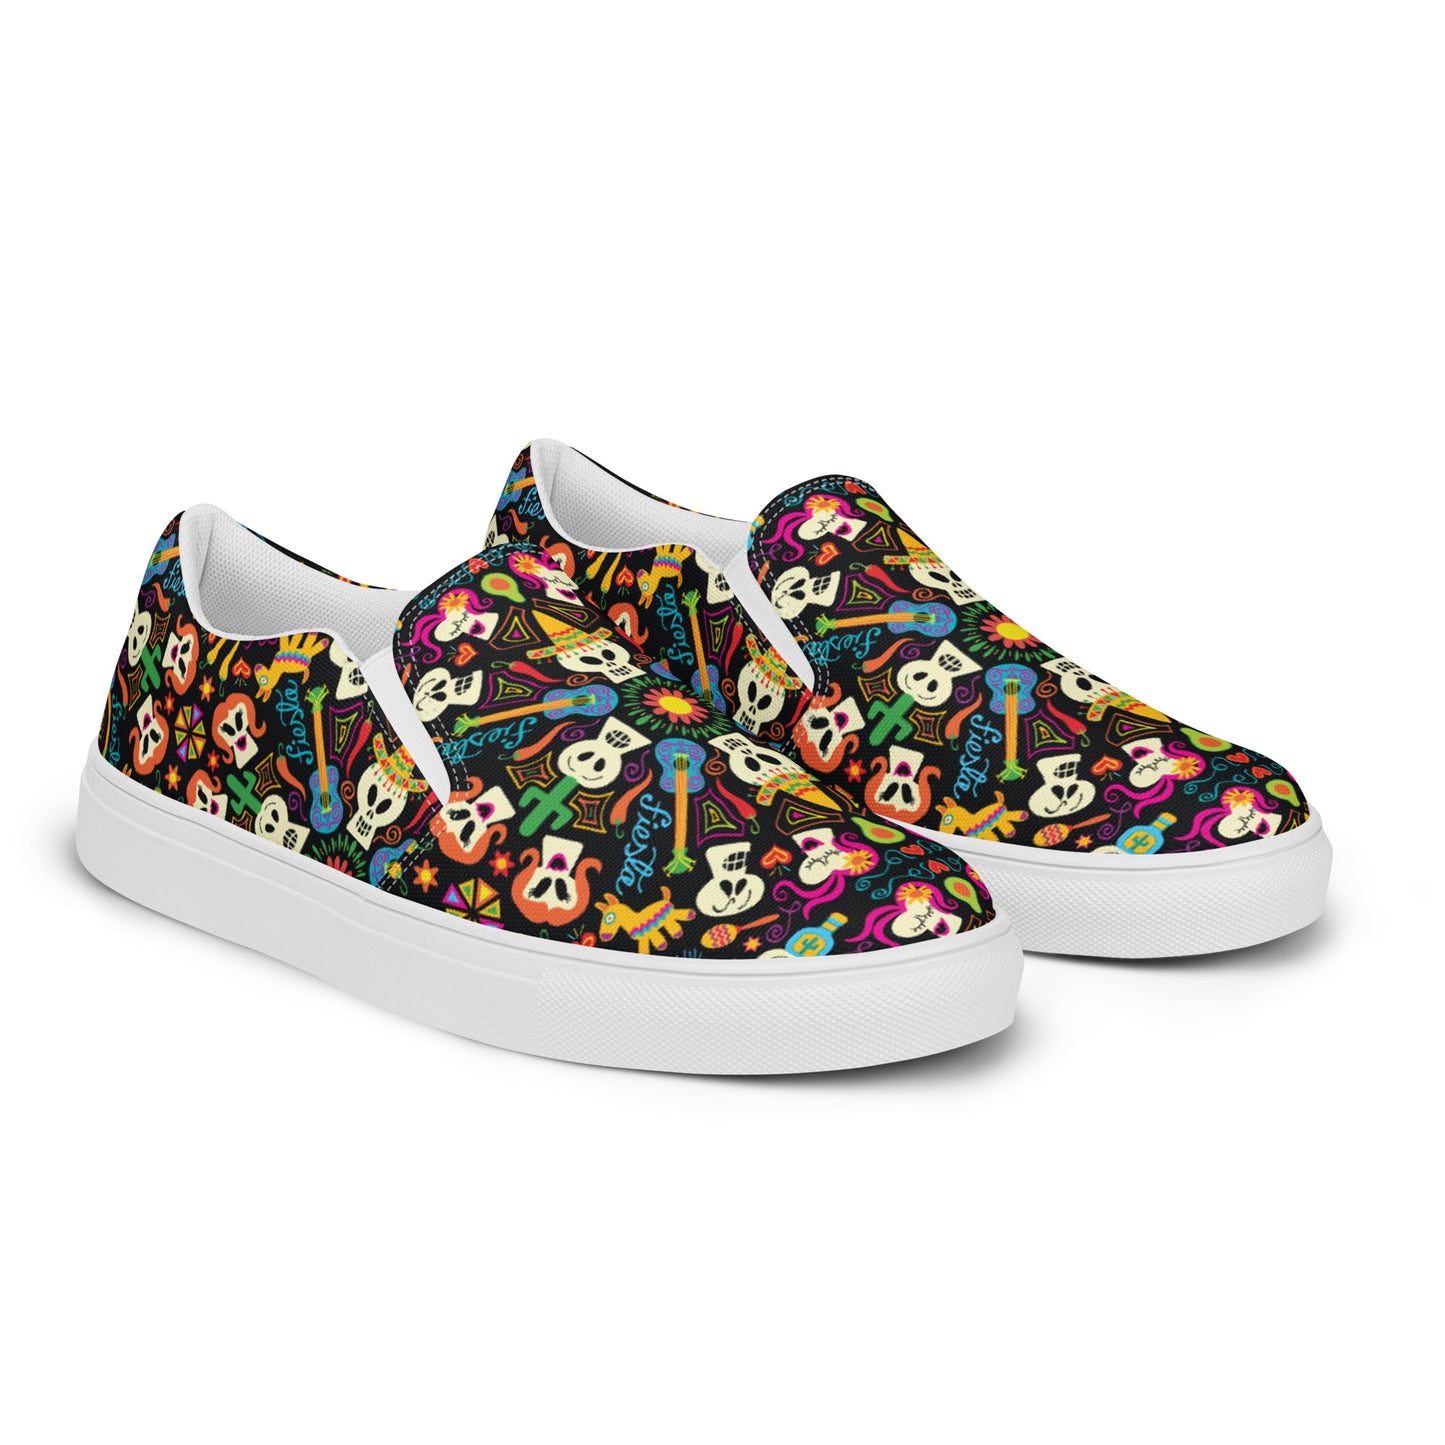 Day of the dead Mexican holiday Women’s slip-on canvas shoes. Overview